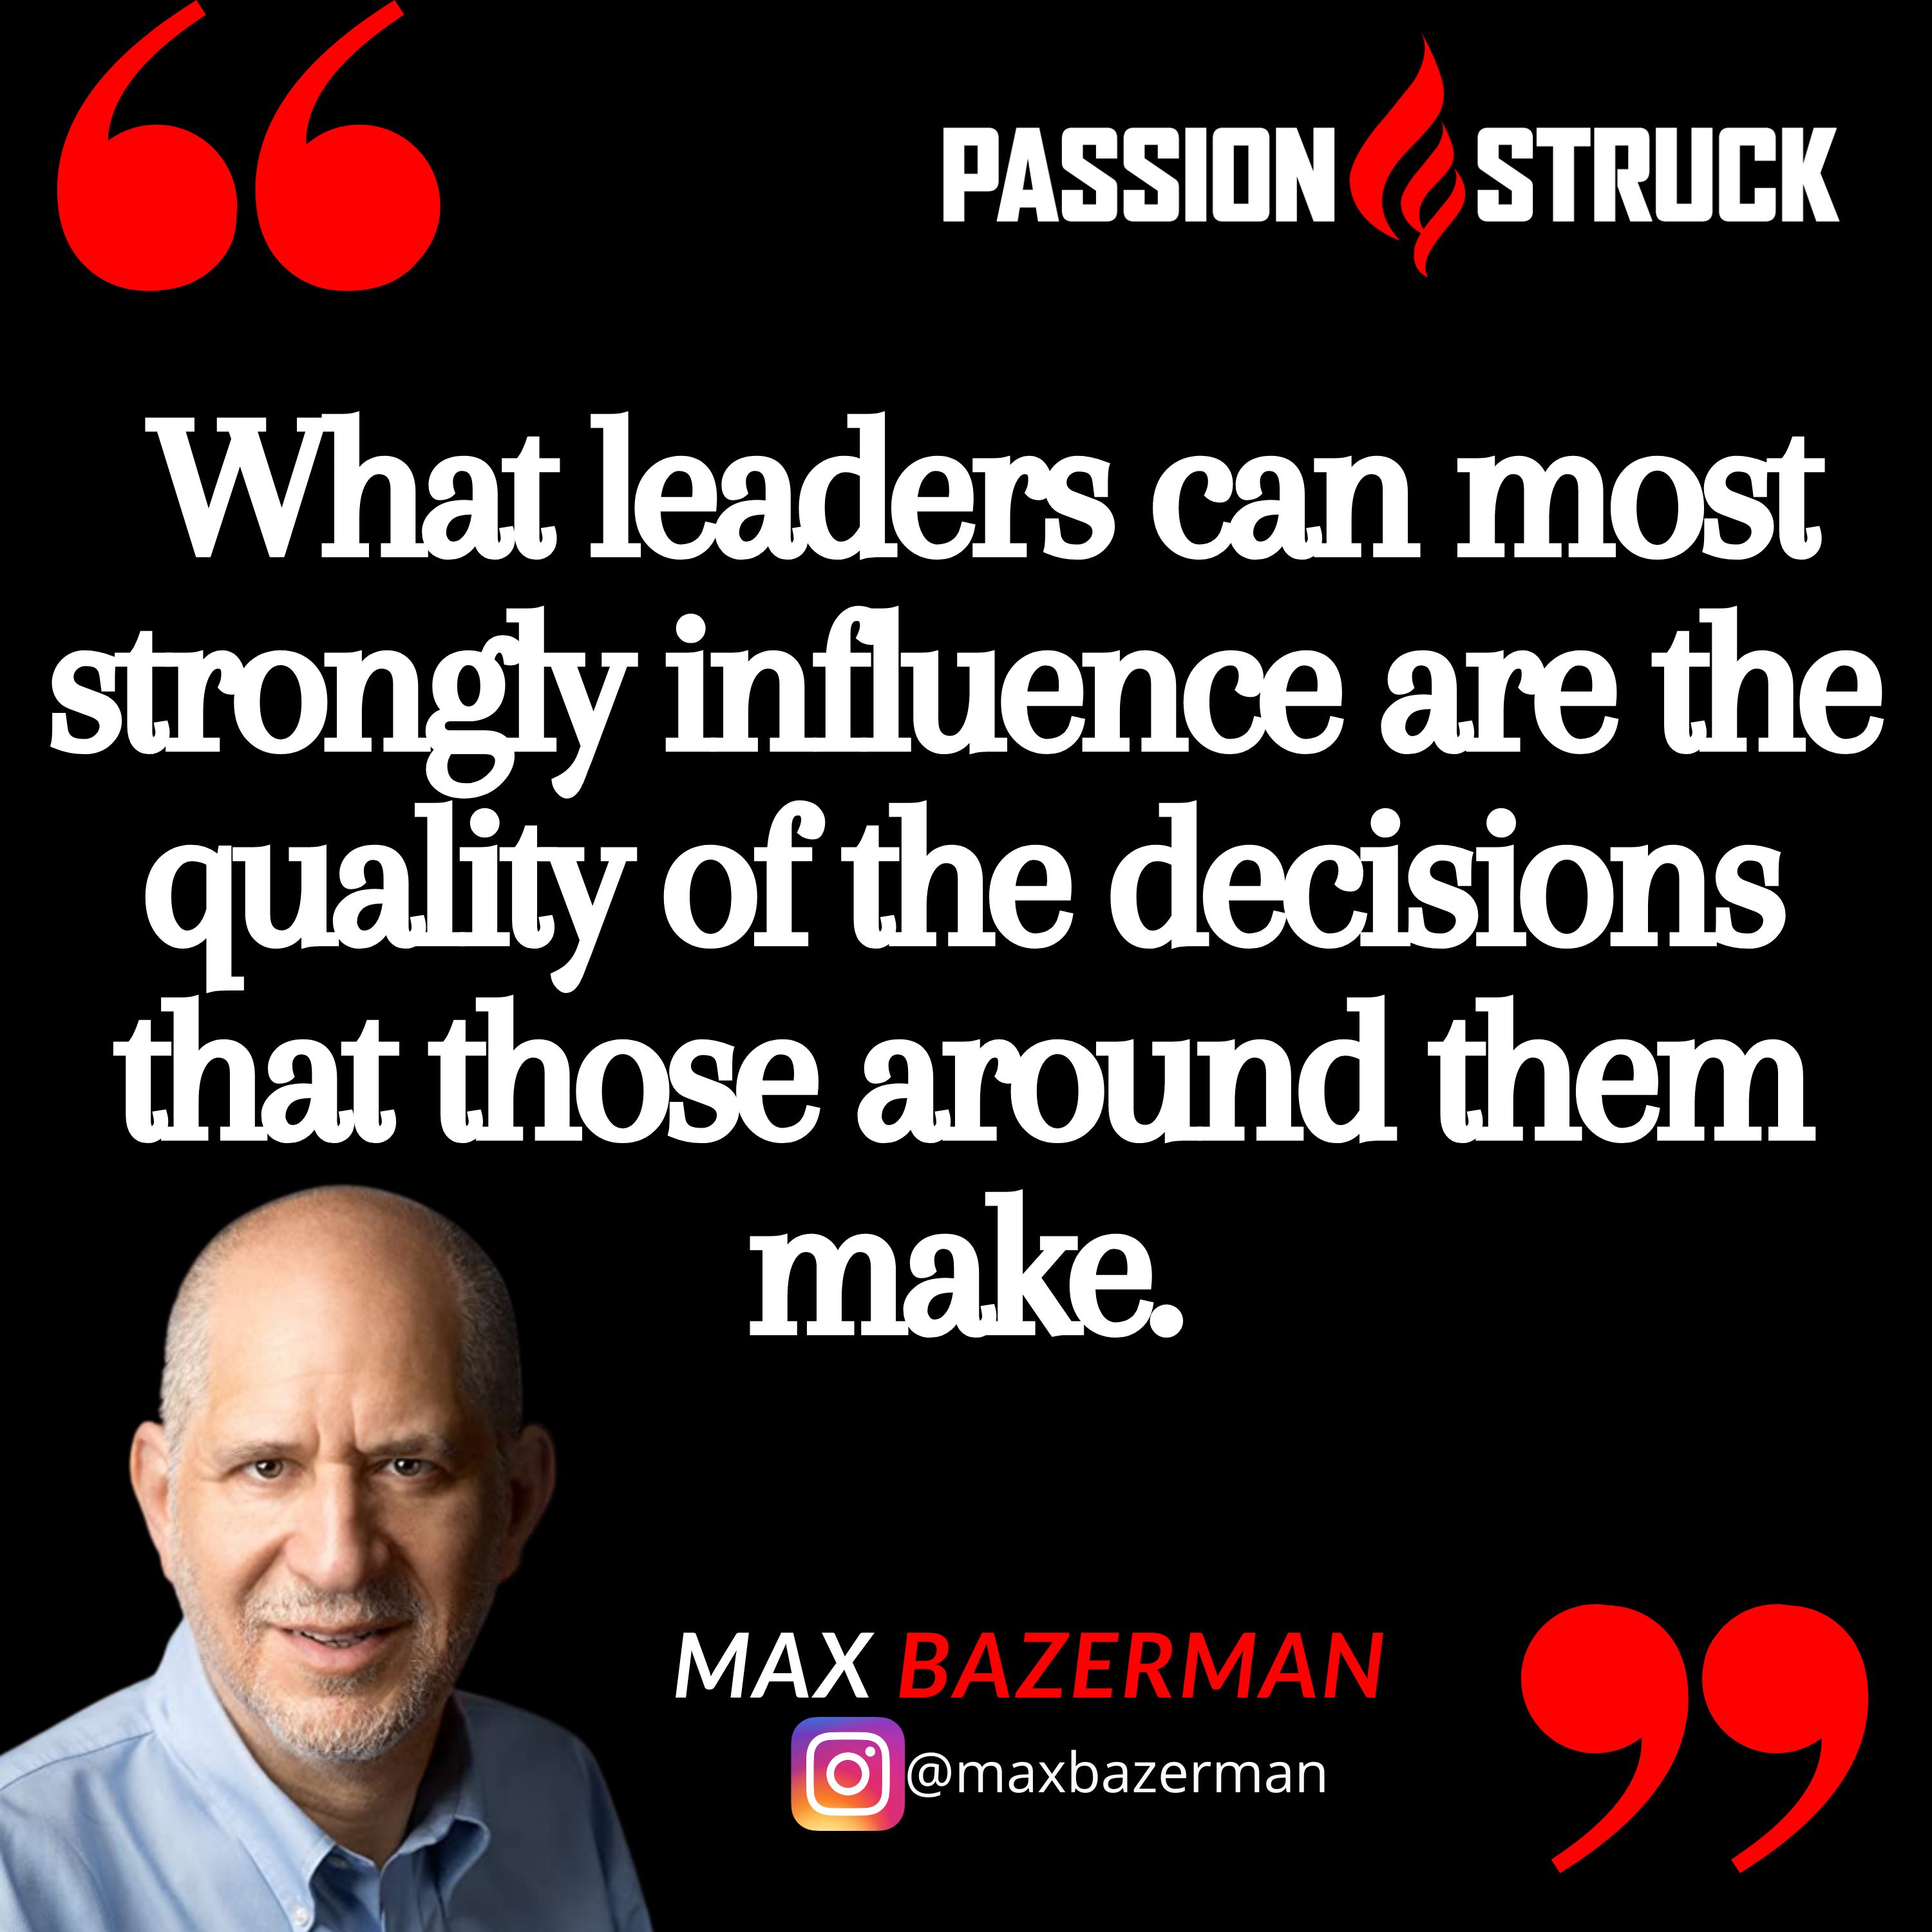 Quote by Max Bazerman on the Passion Struck Podacast: What leaders can most strongly influence are the quality of the decisions that those around them make.